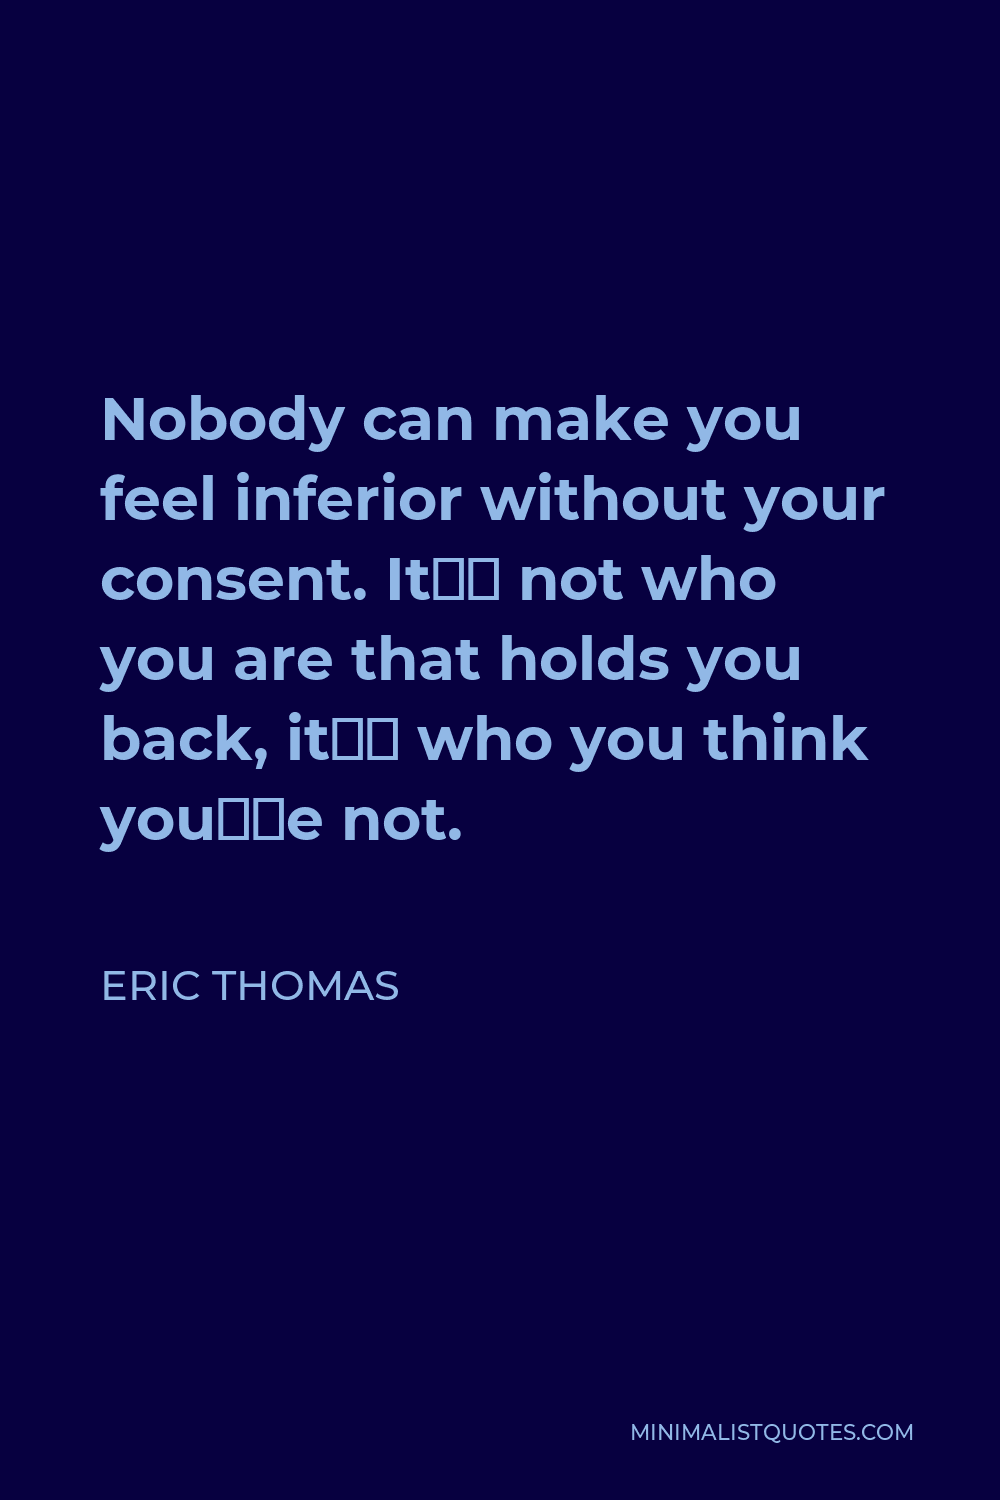 Eric Thomas Quote - Nobody can make you feel inferior without your consent. It’s not who you are that holds you back, it’s who you think you’re not.